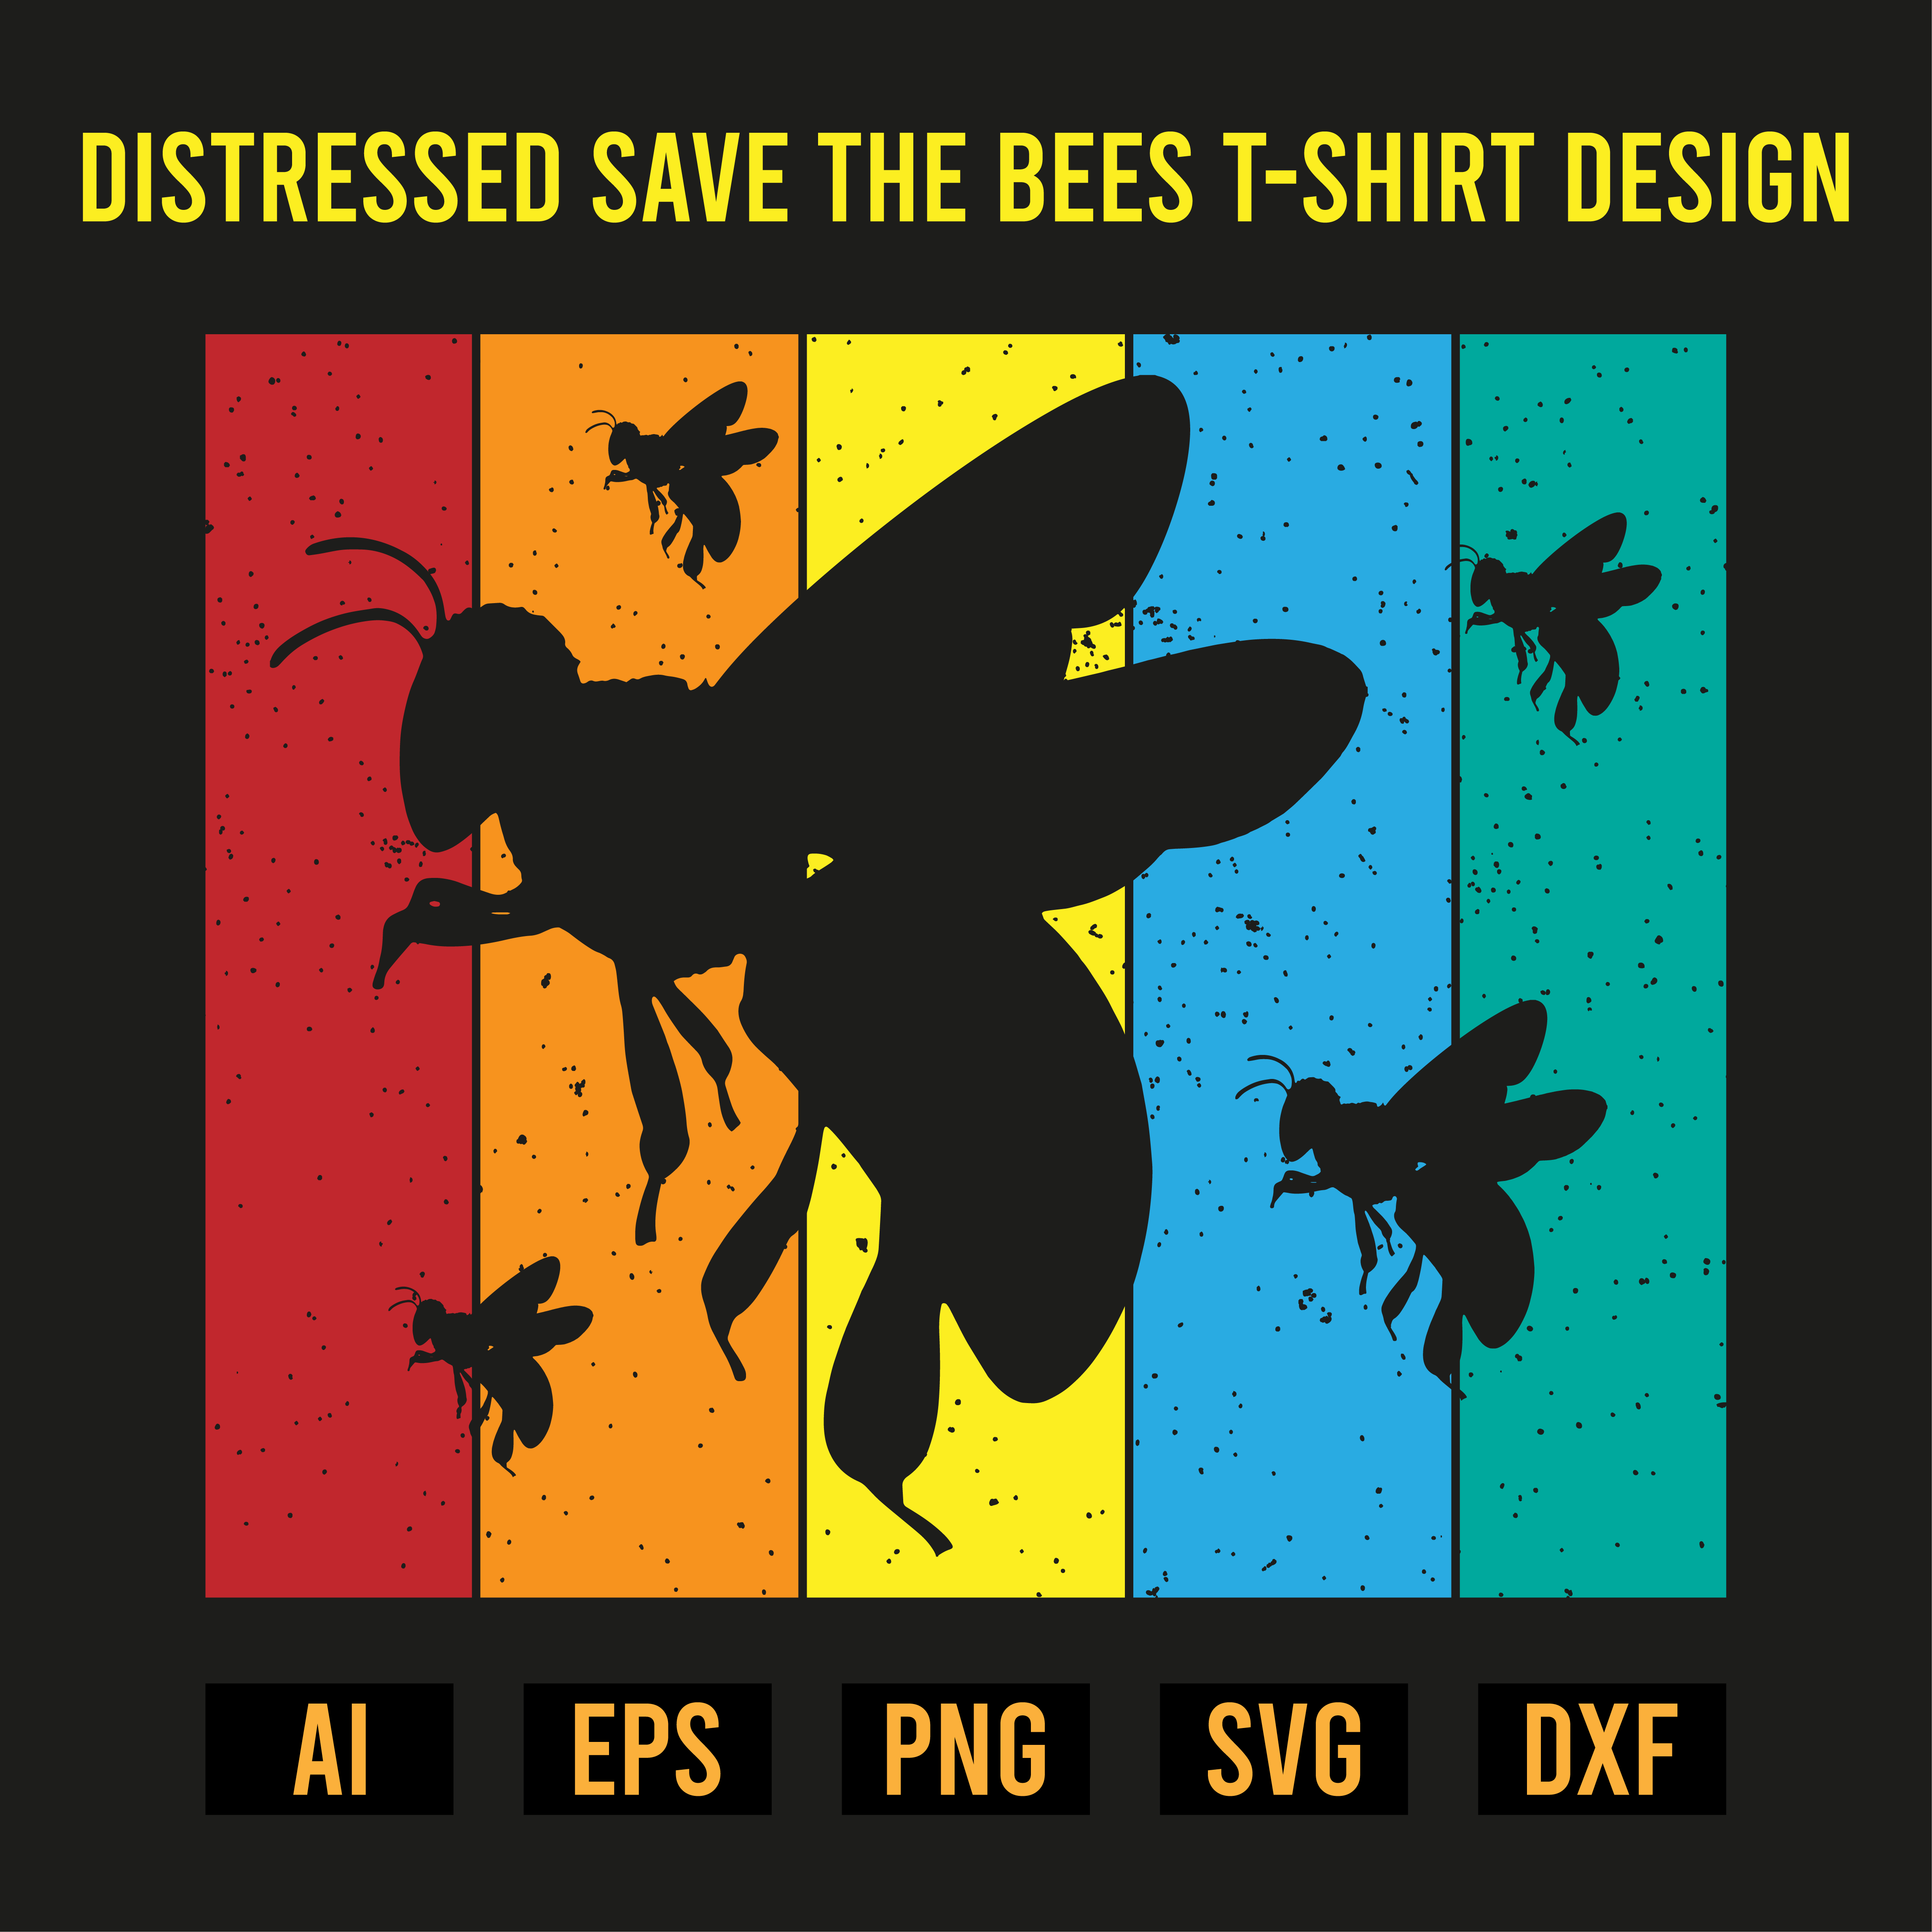 Distressed Save the Bees T- Shirt Design cover image.